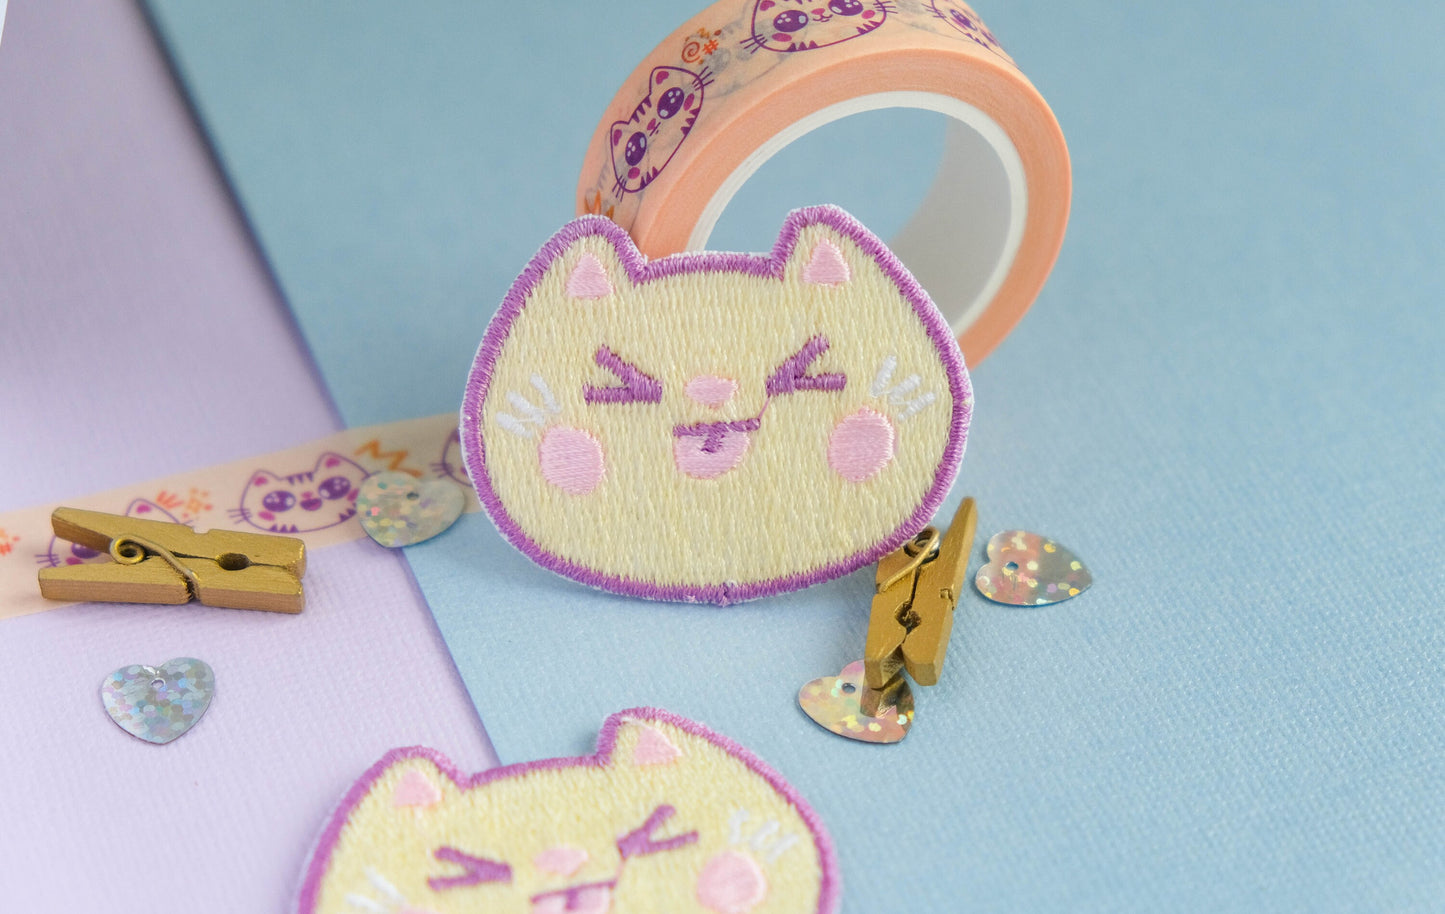 Cute patch iron-on embroidery cute yellow cheeky cat with his tongue out to decorate jackets and jeans